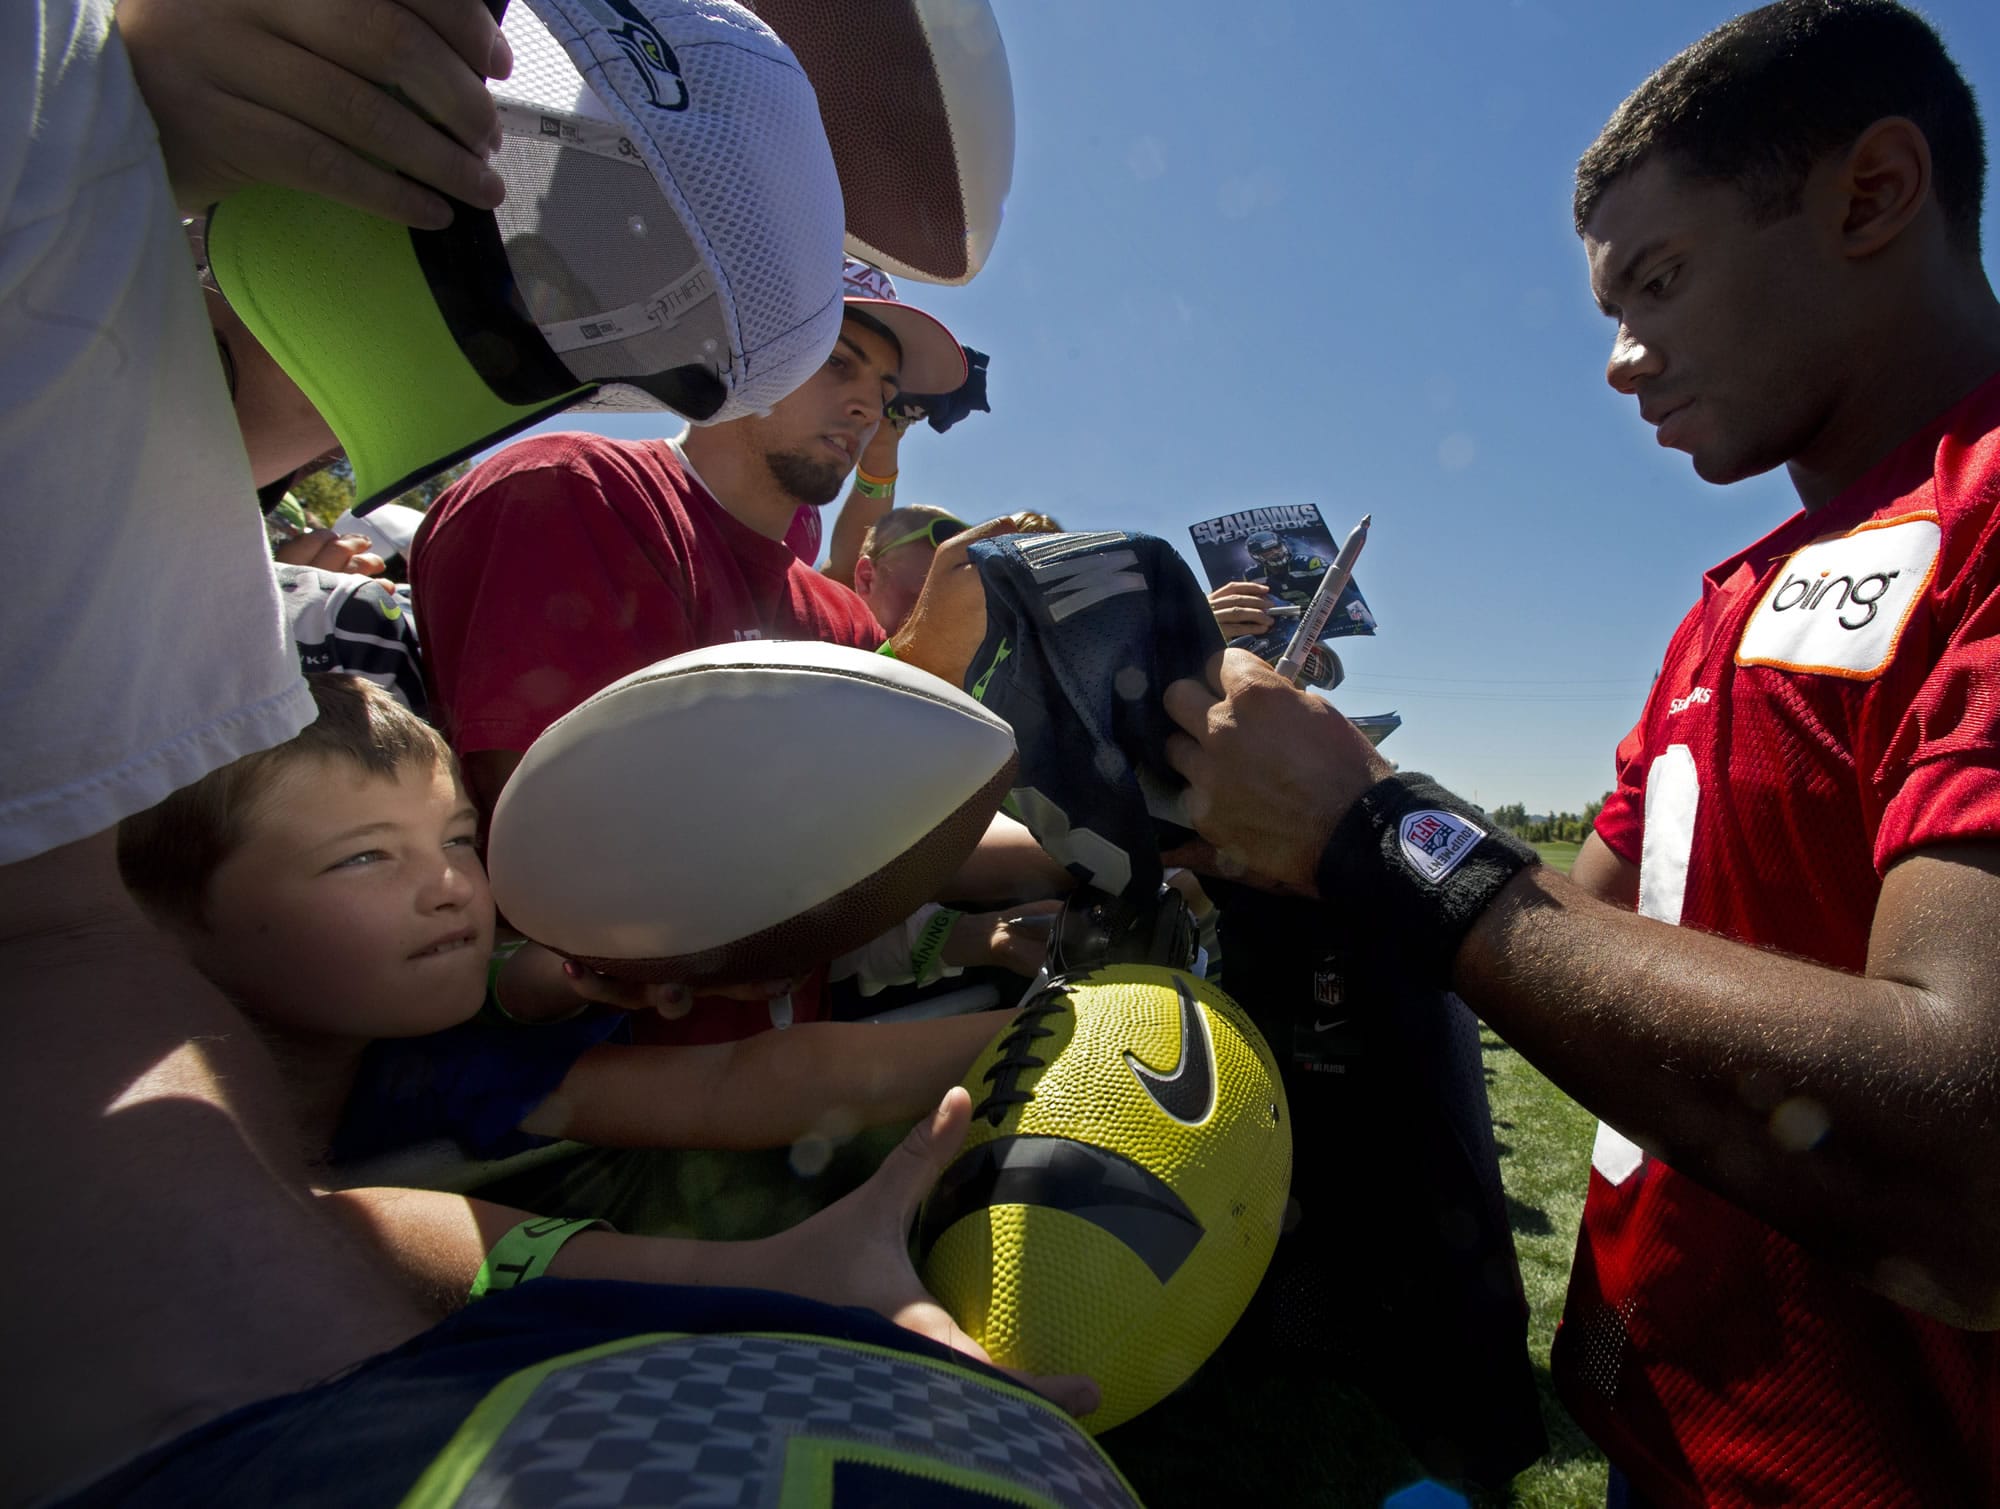 Seattle Seahawks fan Alex Eaton, 11, looks for an opening in a sea of souvenirs for an autograph for his yellow football from Seattle Seahawks quarterback Russell Wilson at training camp Friday.